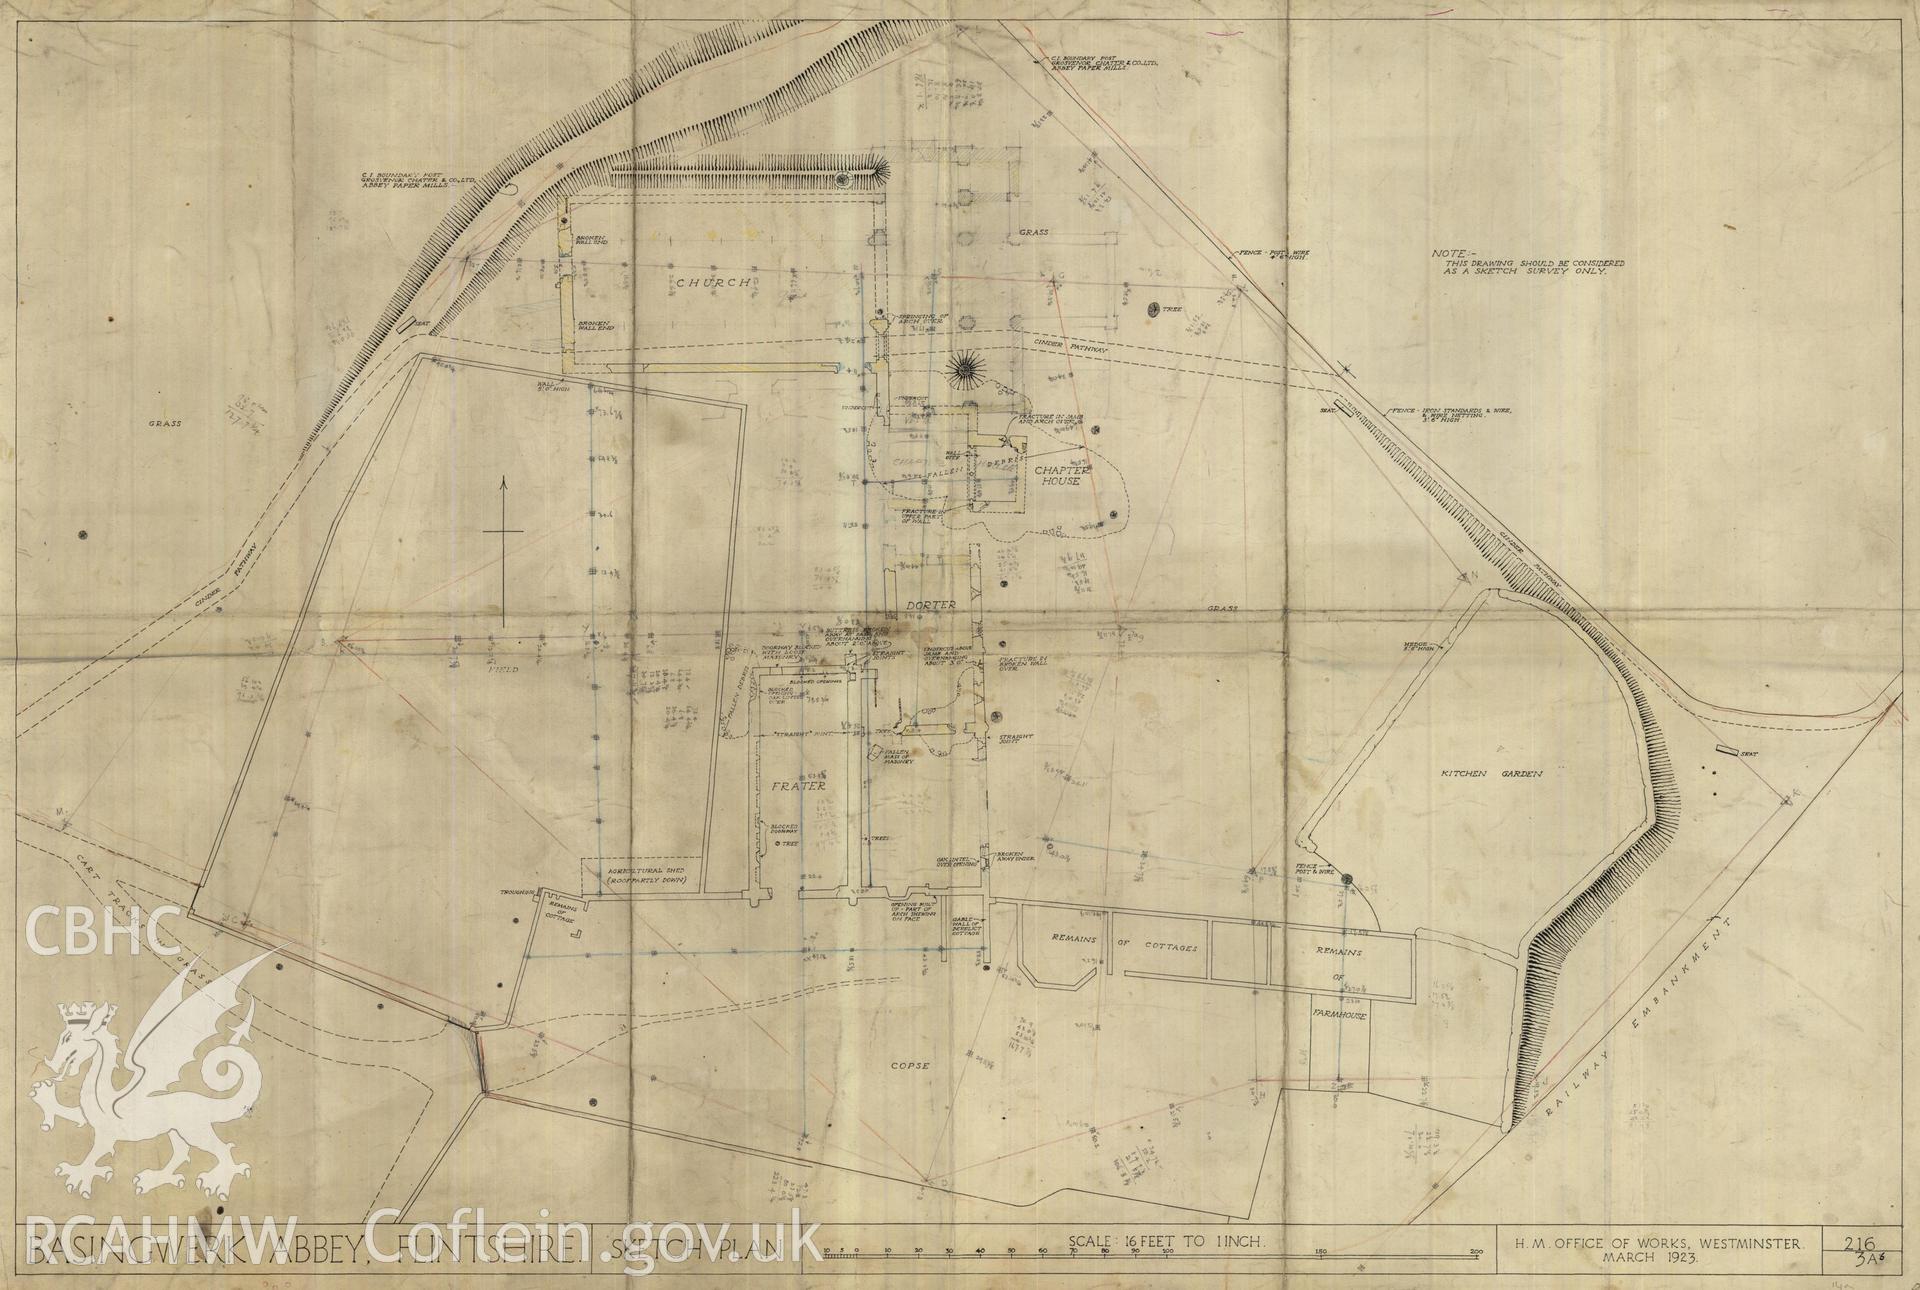 Cadw guardianship monument drawing of Basingwerk. Plan with dimensions. Cadw Ref. No:216/3A6. Scale 1:192.